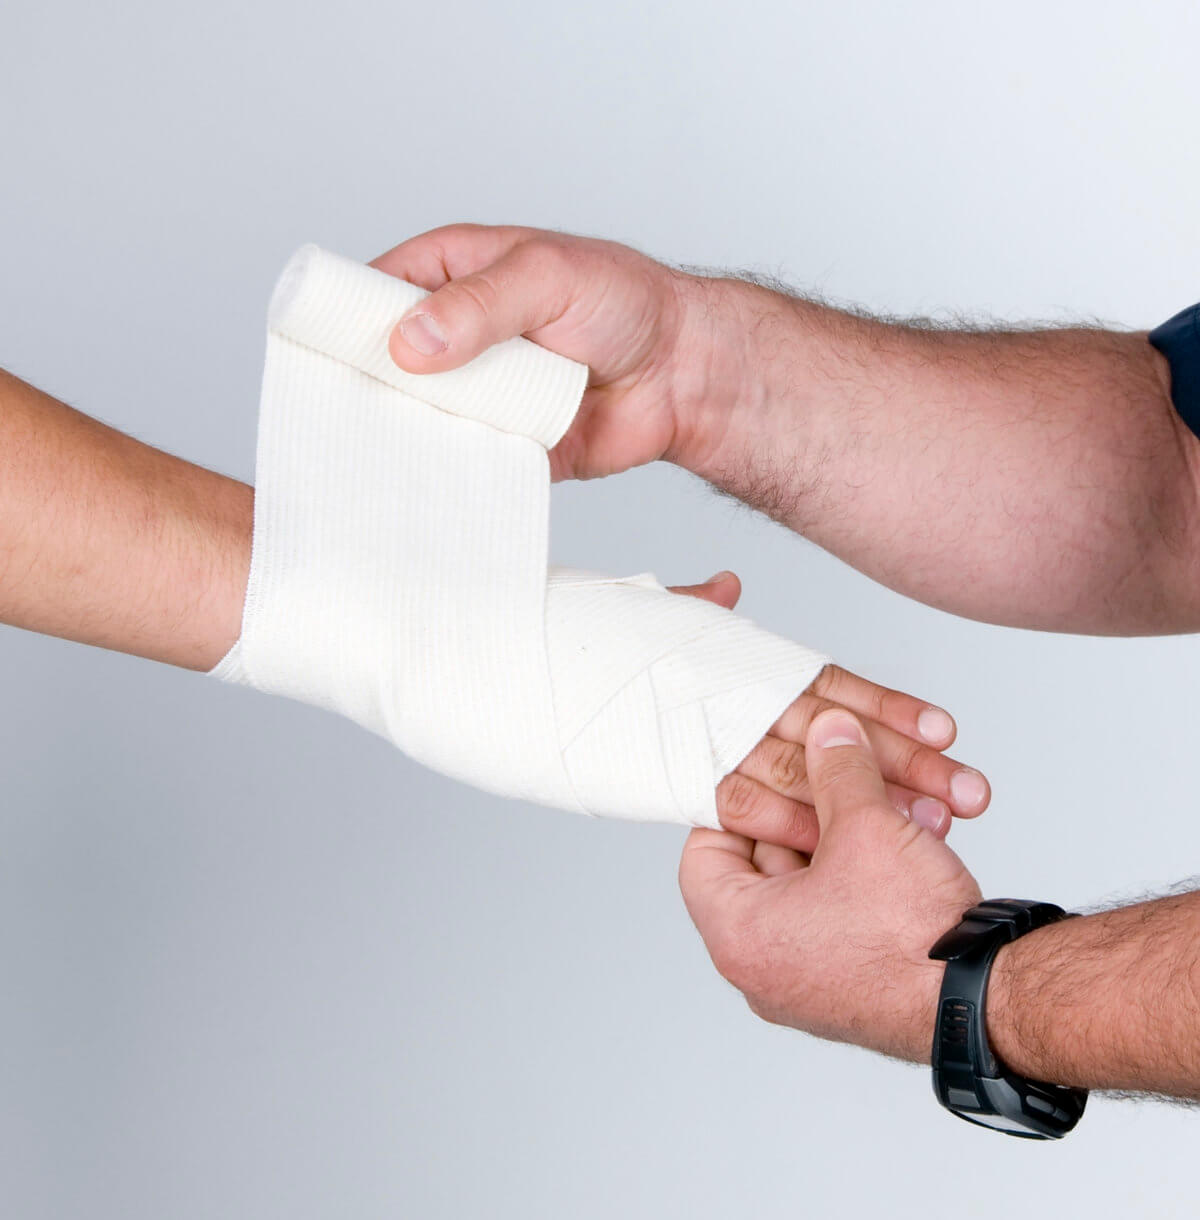 First Aid for Cuts and Scrapes